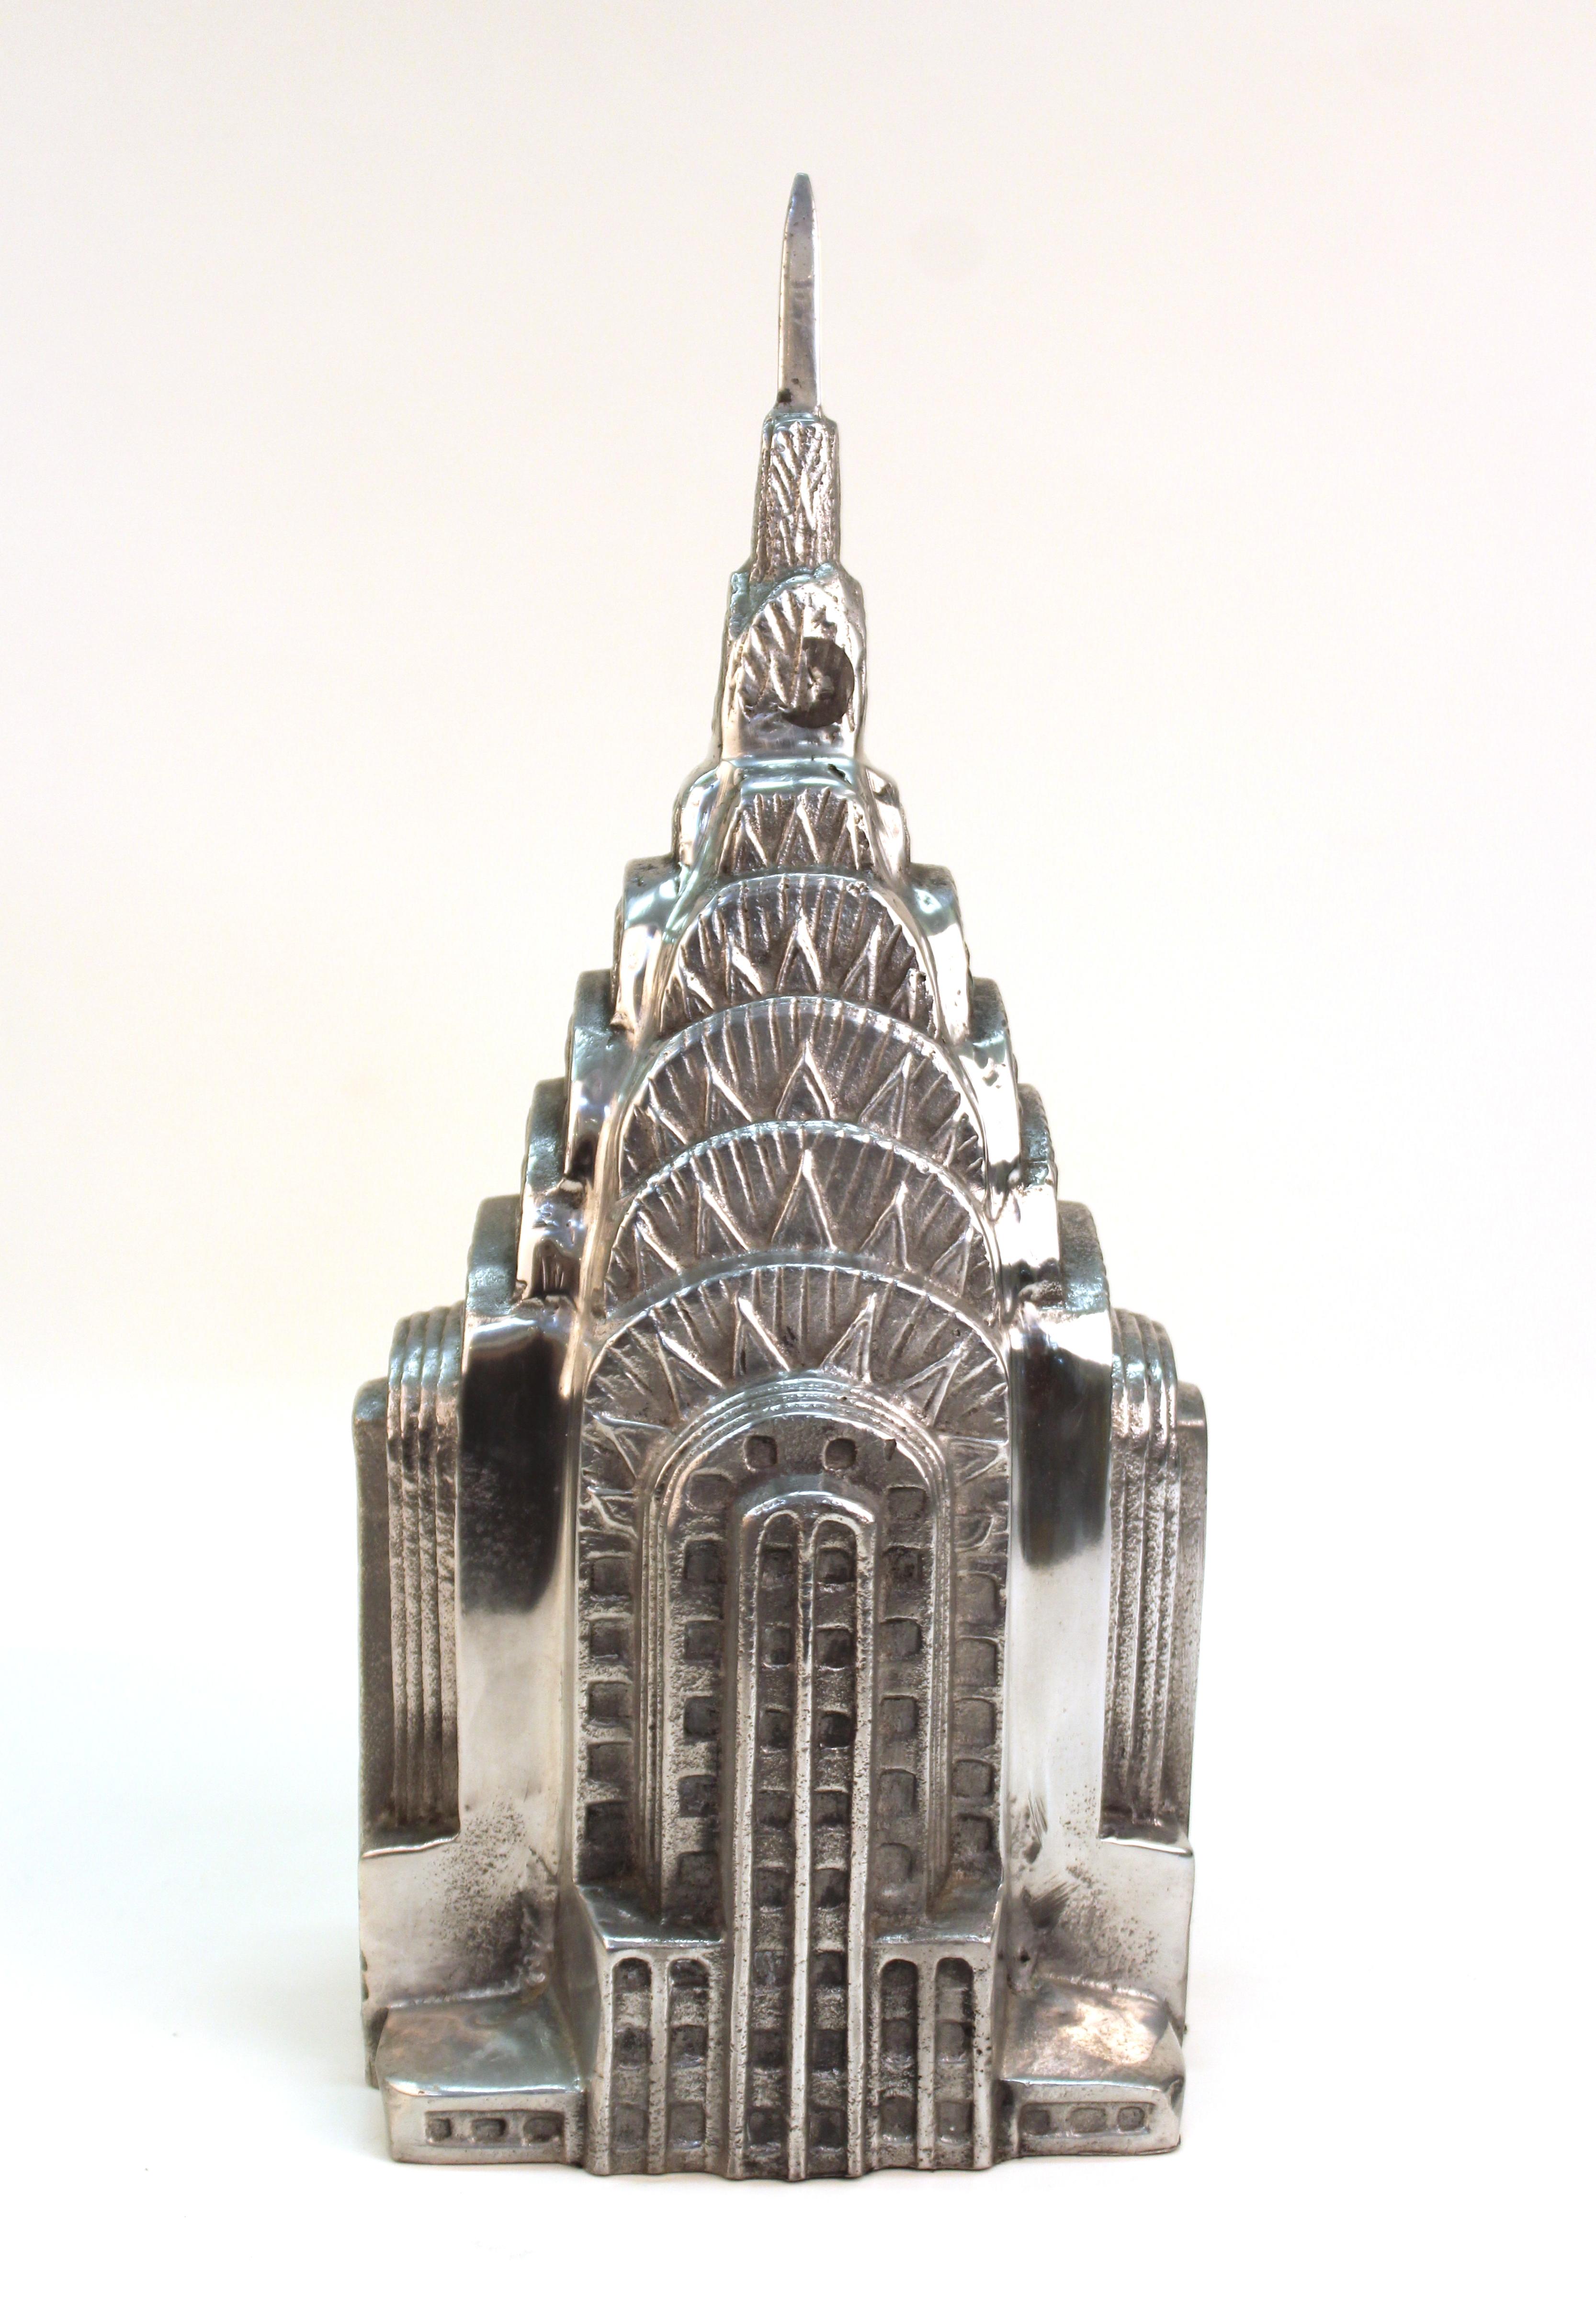 Modern architectural scale model of the upper section of the spire of New York City's Chrysler Building, cast in aluminum. The piece was made in the 1970s and is in great vintage condition.